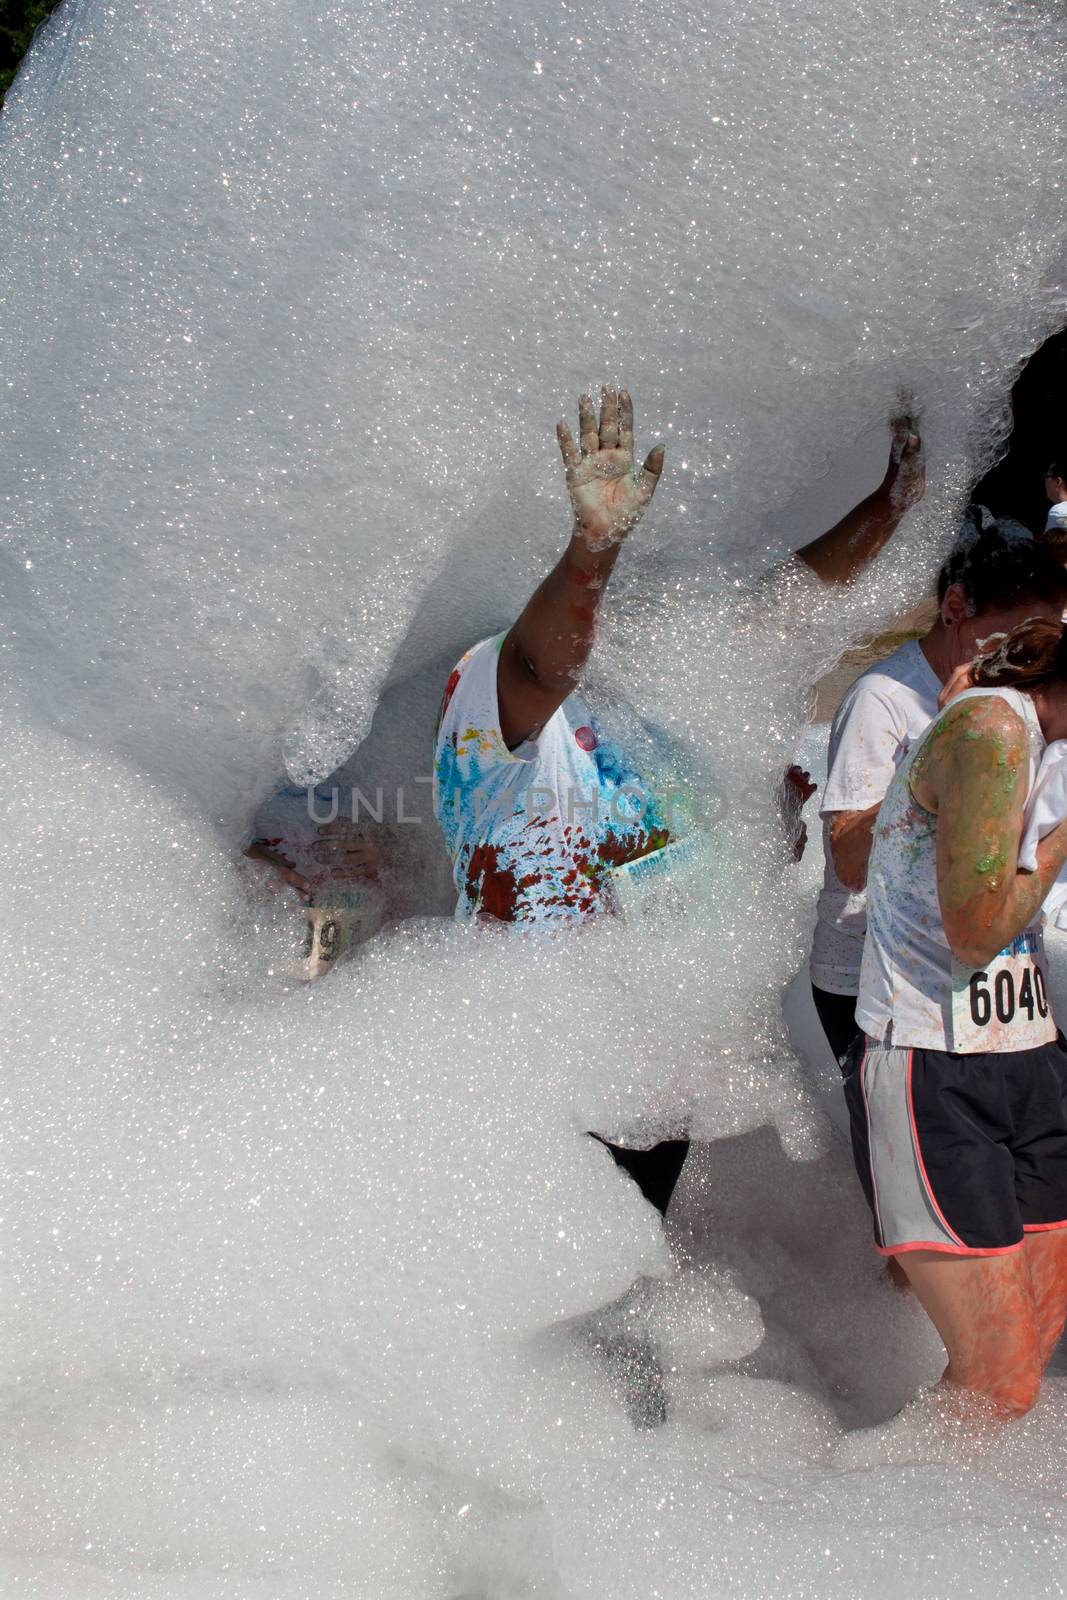 Woman Is Covered In Soap Suds At Bubble Palooza Event by BluIz60